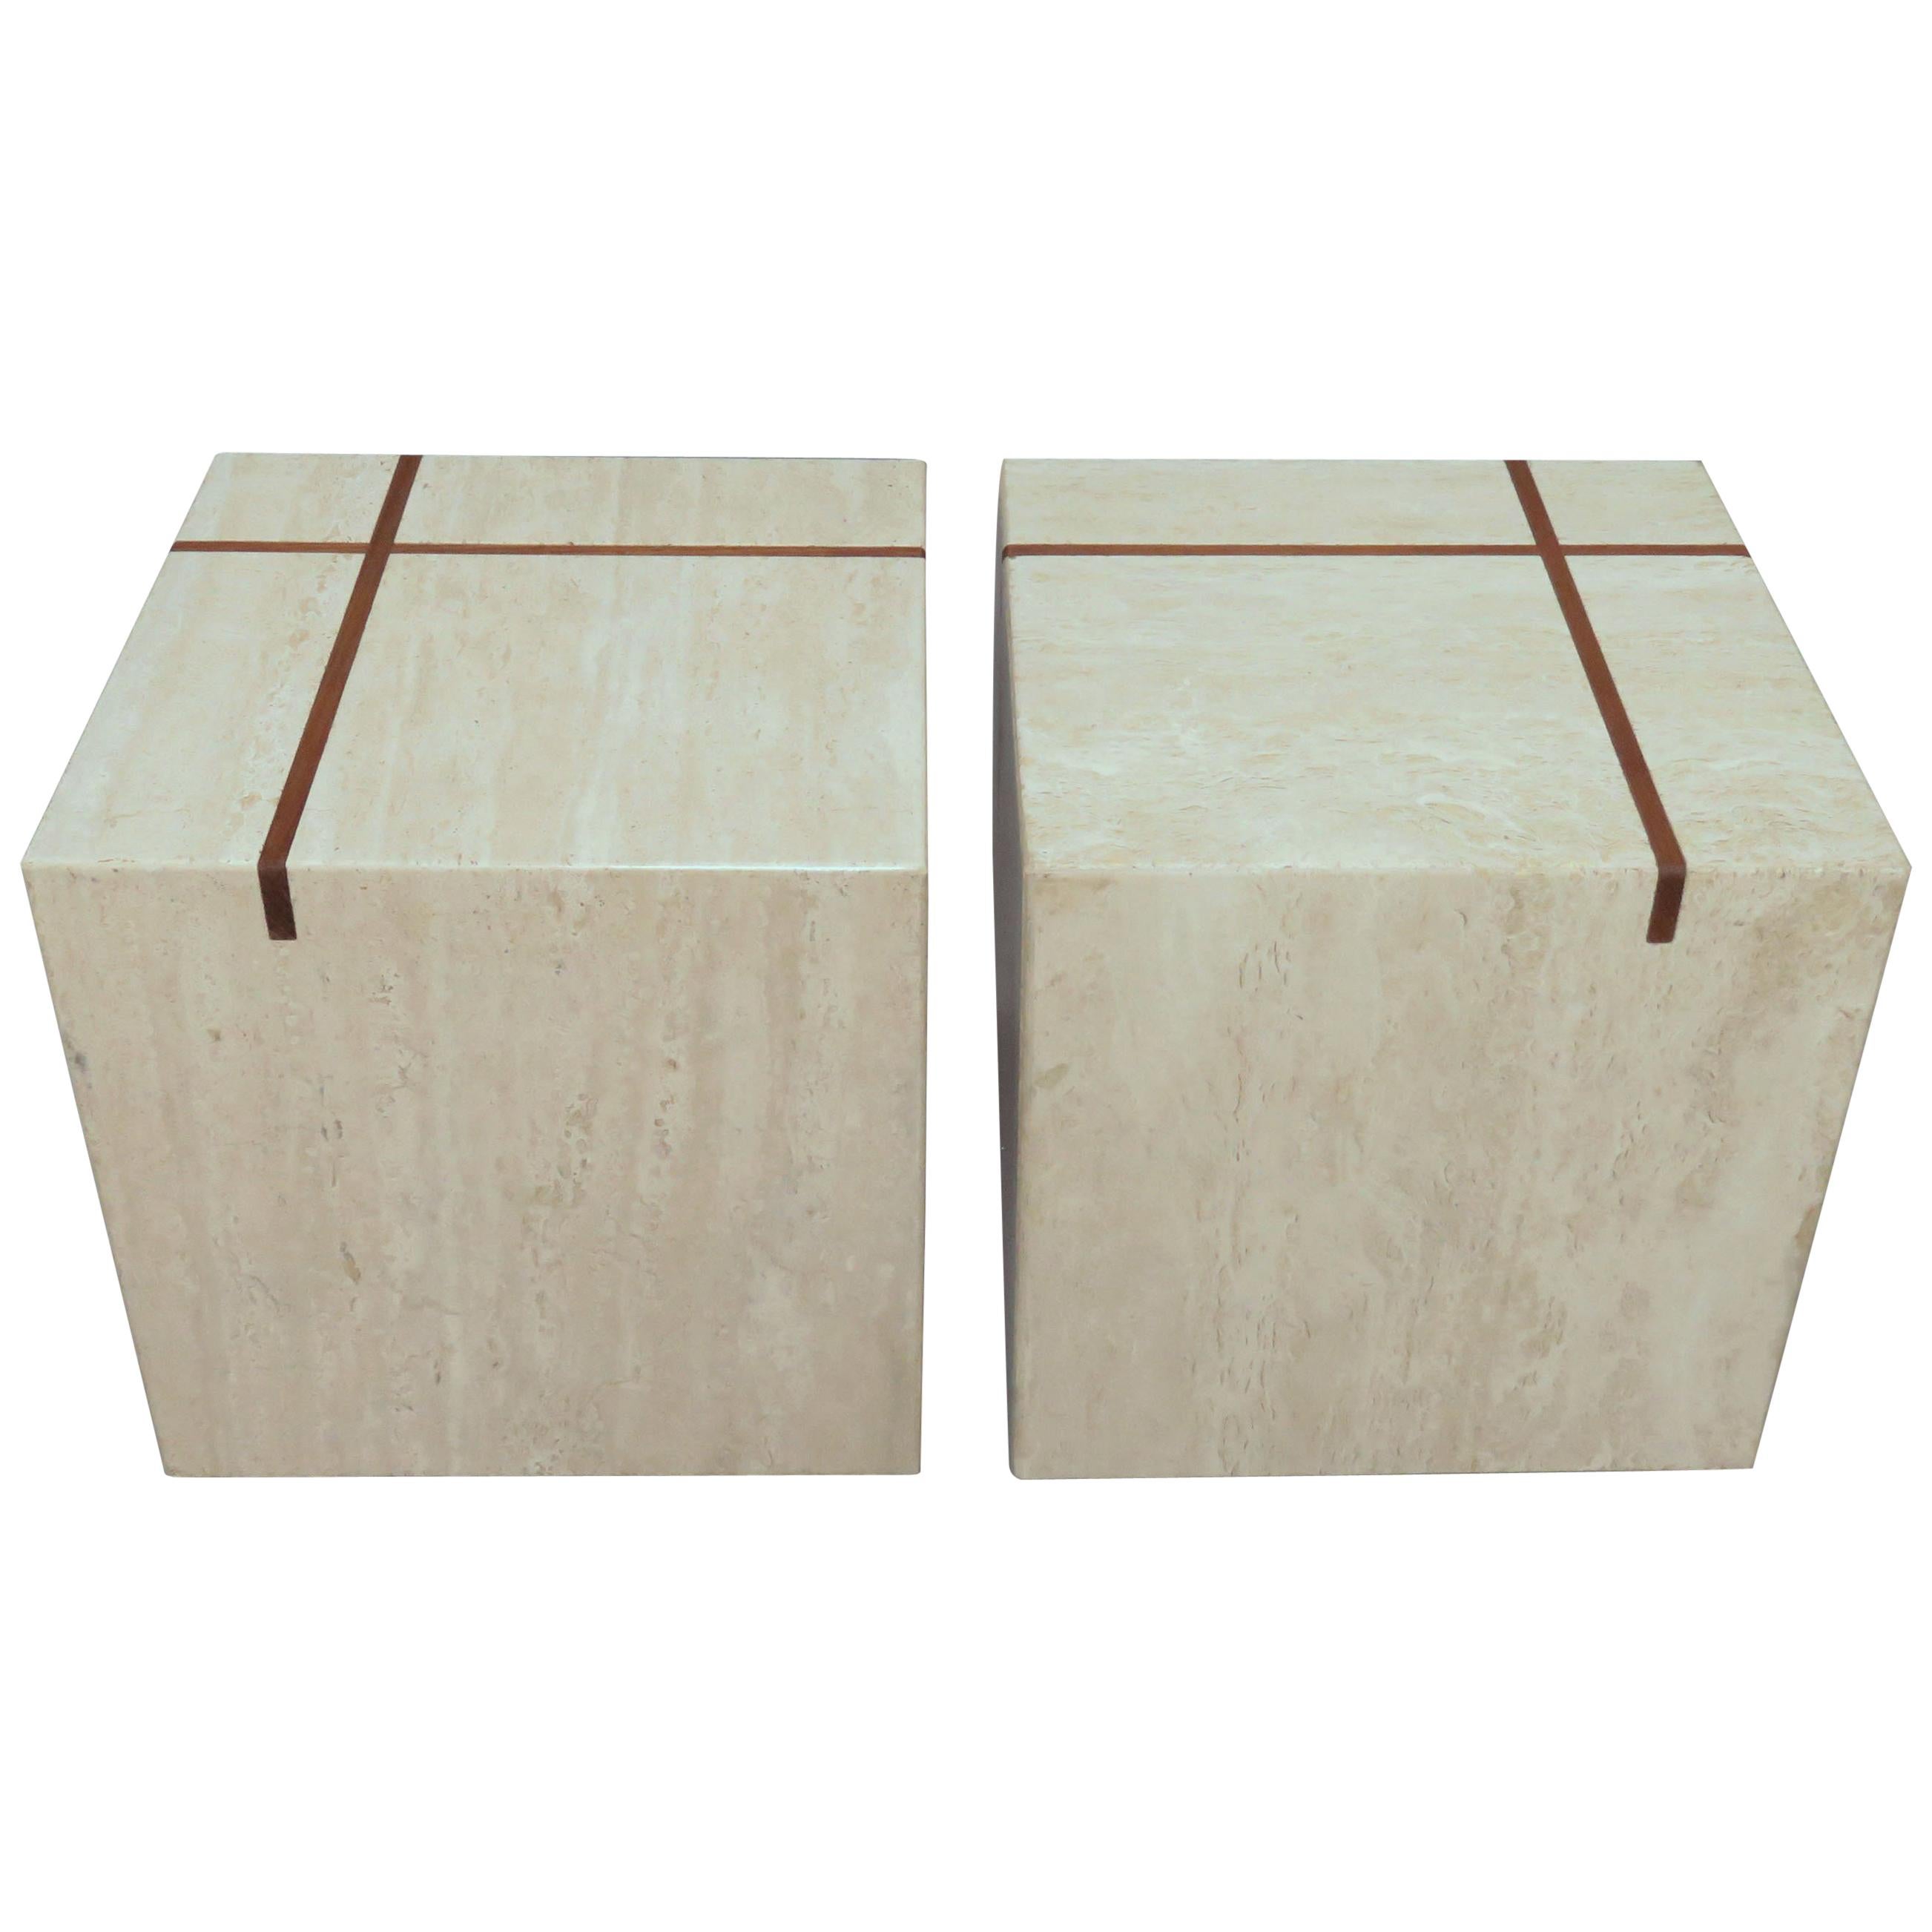 Pair of Travertine Cube End Tables with Teak Banded Inlay, circa 1970s